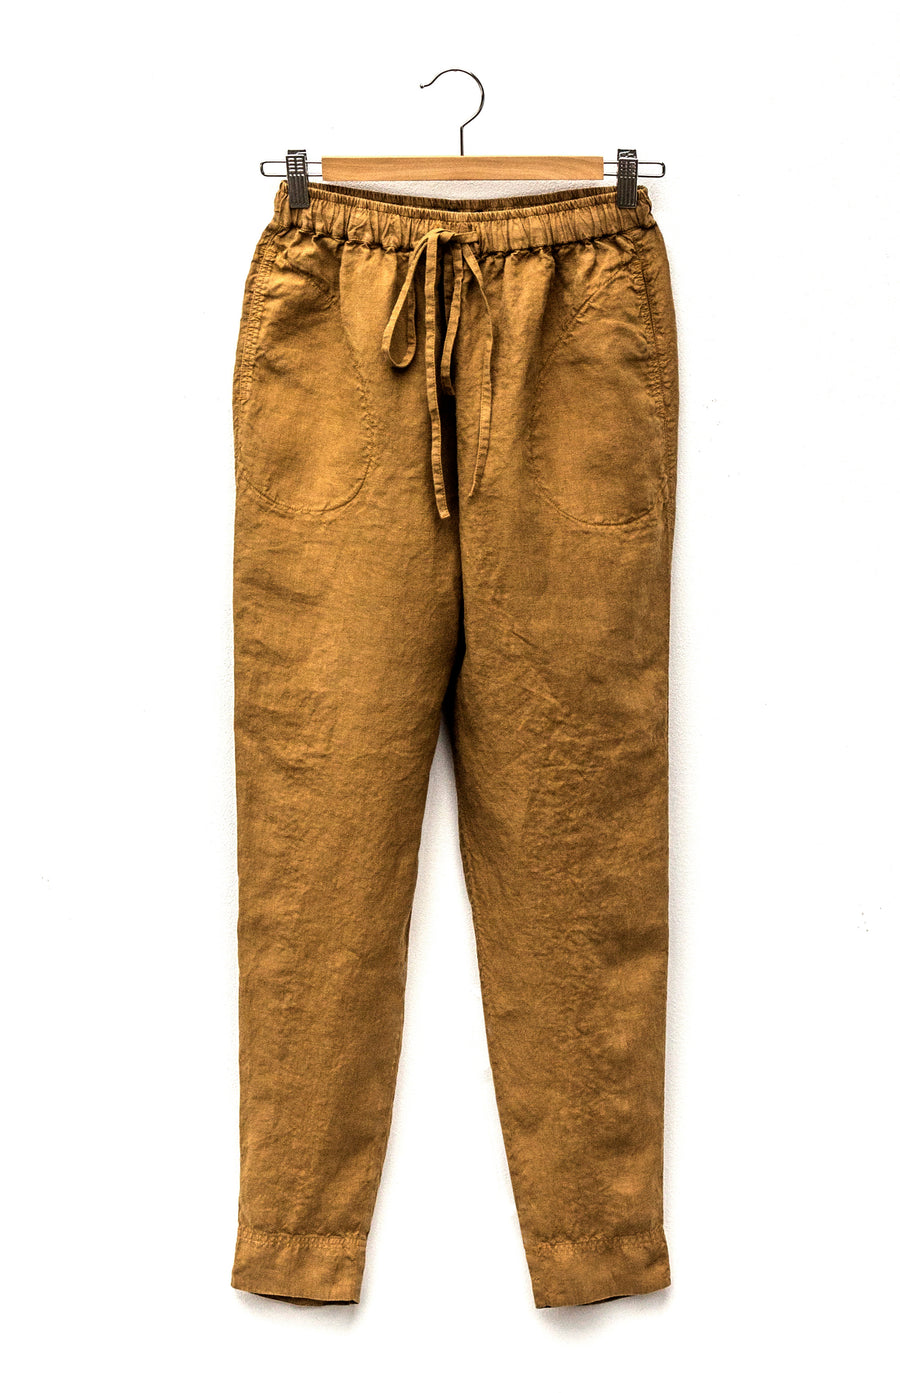 Extra fine trousers in Wood Thrush shade